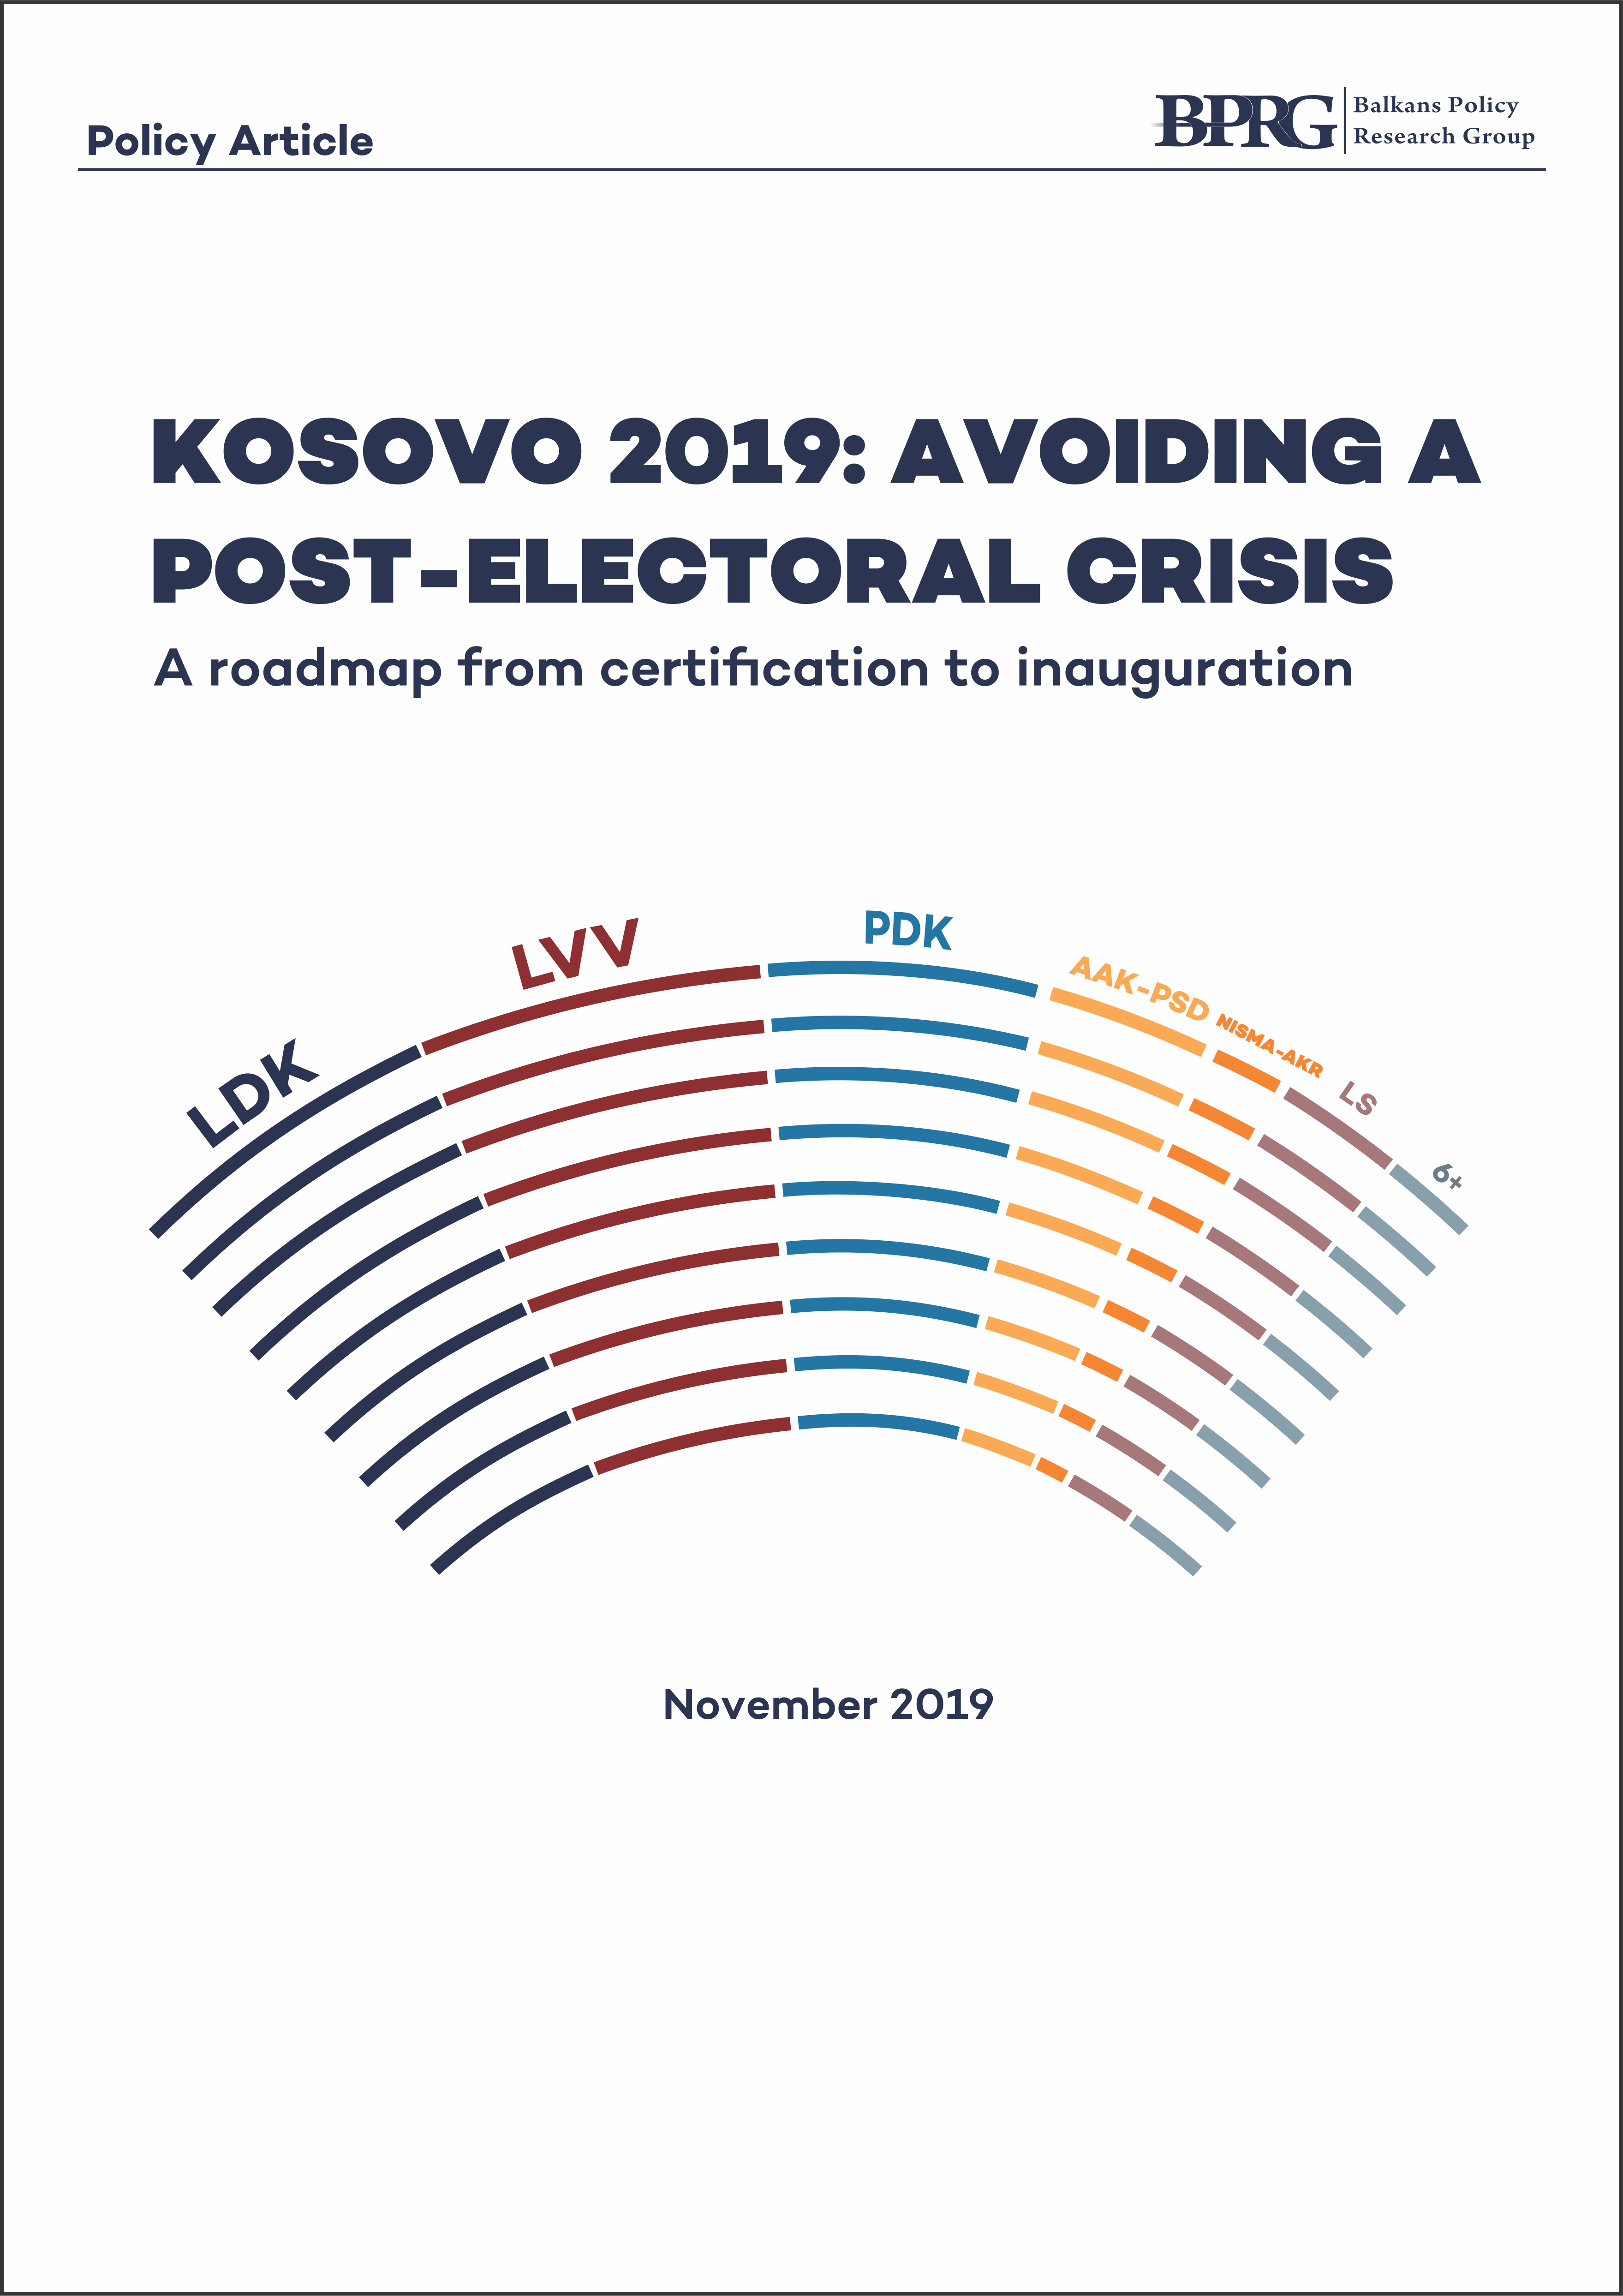 Kosovo 2019: Avoiding a Post-Electoral Crisis – A Roadmap from Certification to Inauguration